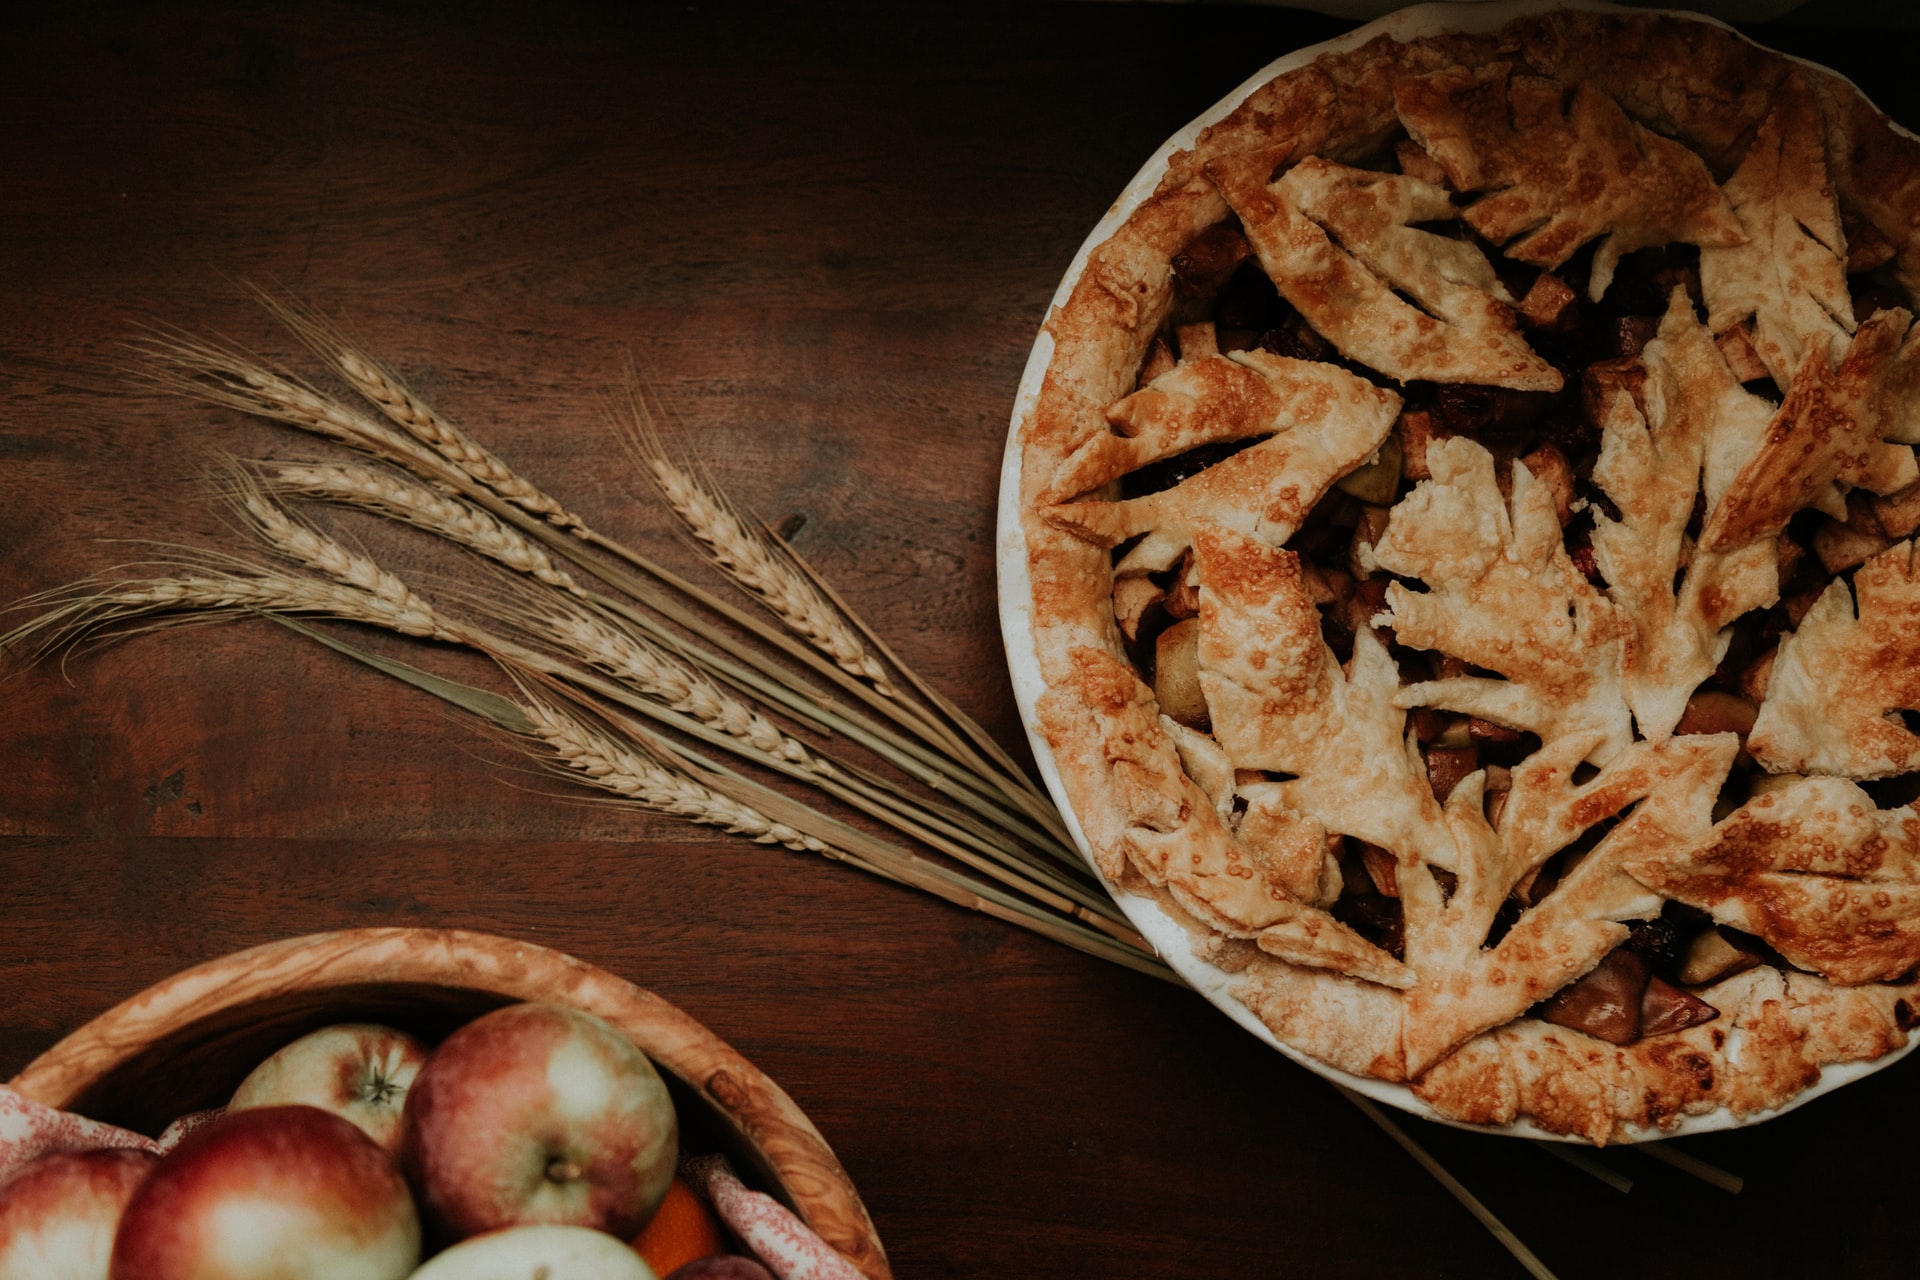 baked apple pie next to strands of wheat and a bowl of apples